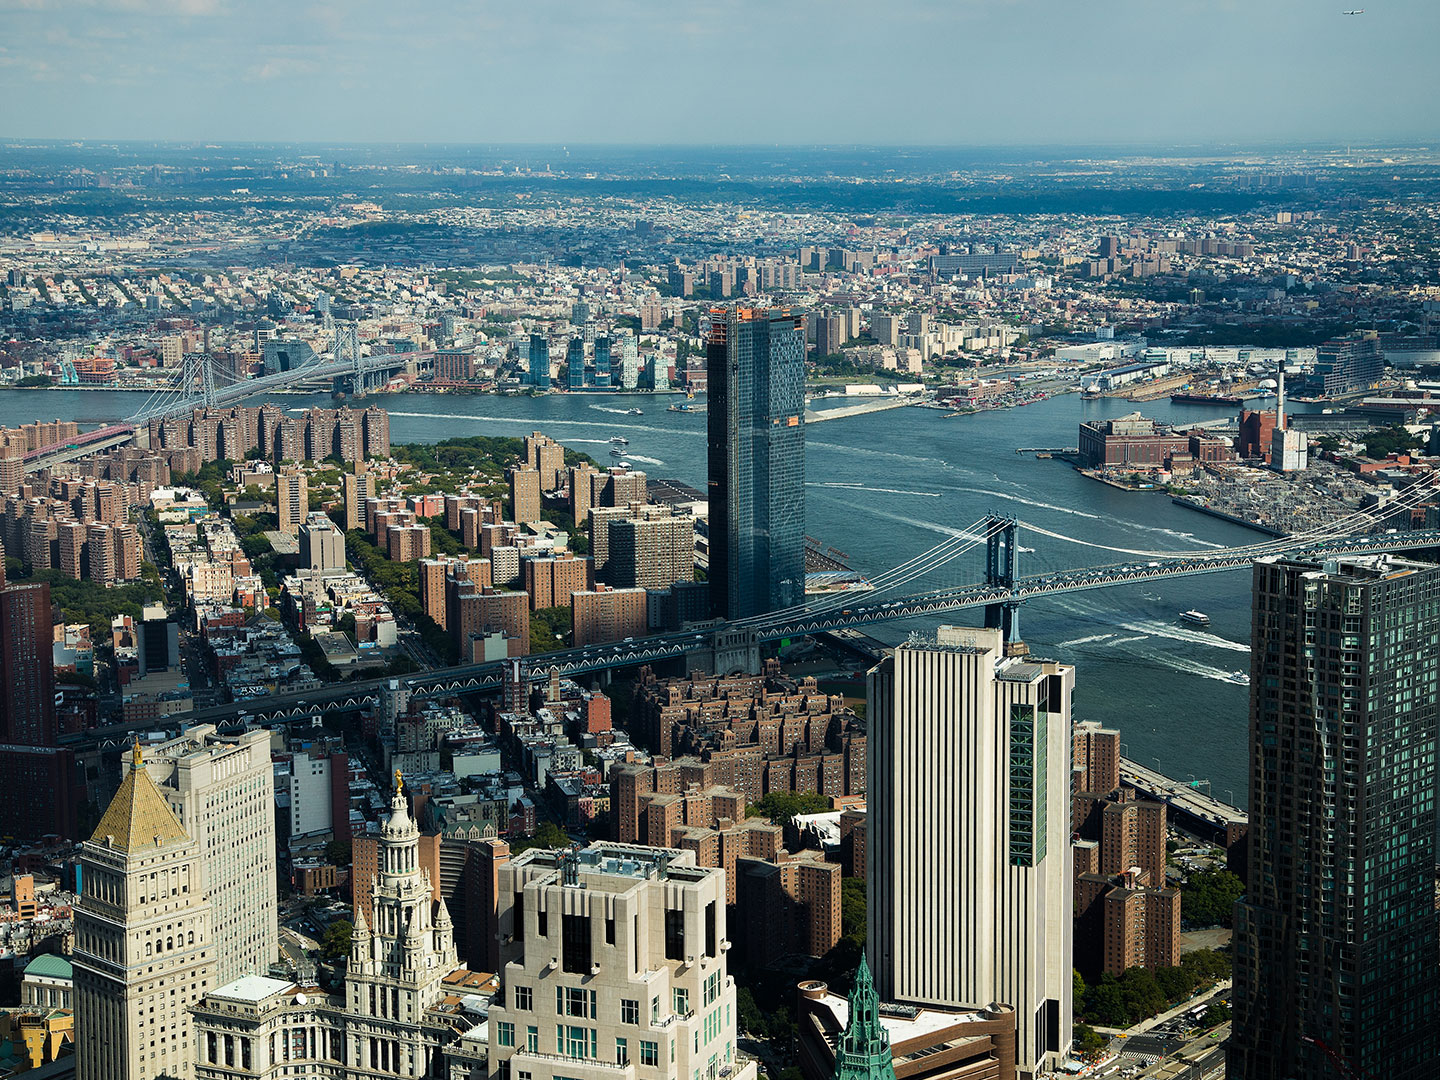 The preliminary climate resiliency guidelines were tested across each of the city’s five boroughs, including Brooklyn, Manhattan, Queens, Staten Island, and the Bronx. Photo courtesy of Dewberry.